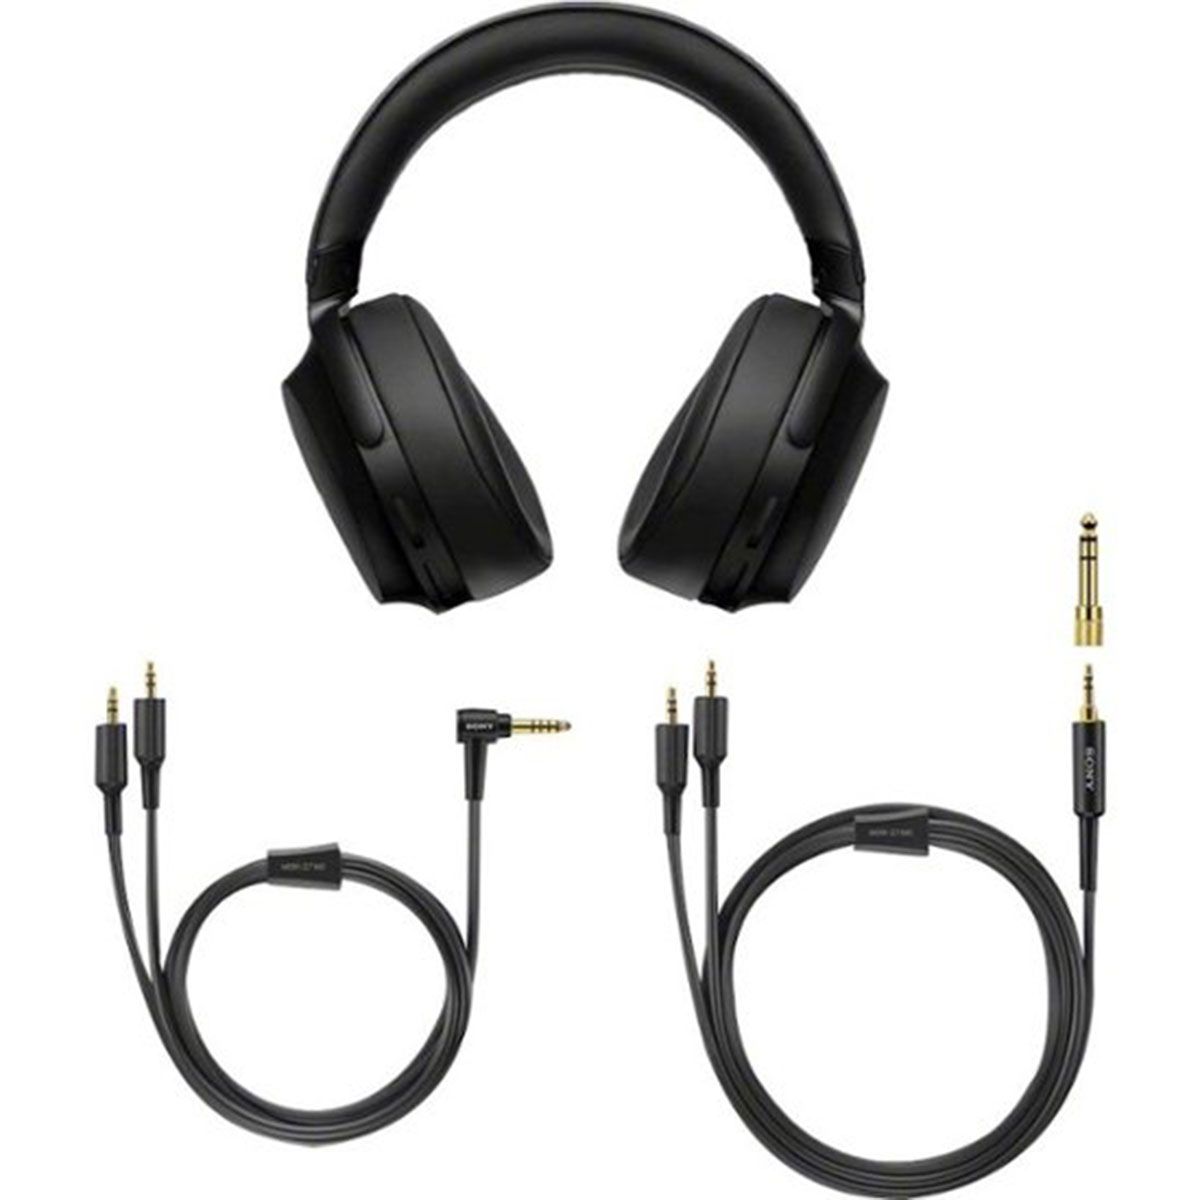 MDR-Z7M2 Hi-Res Stereo Over-Ear Headphones | Audio Advice